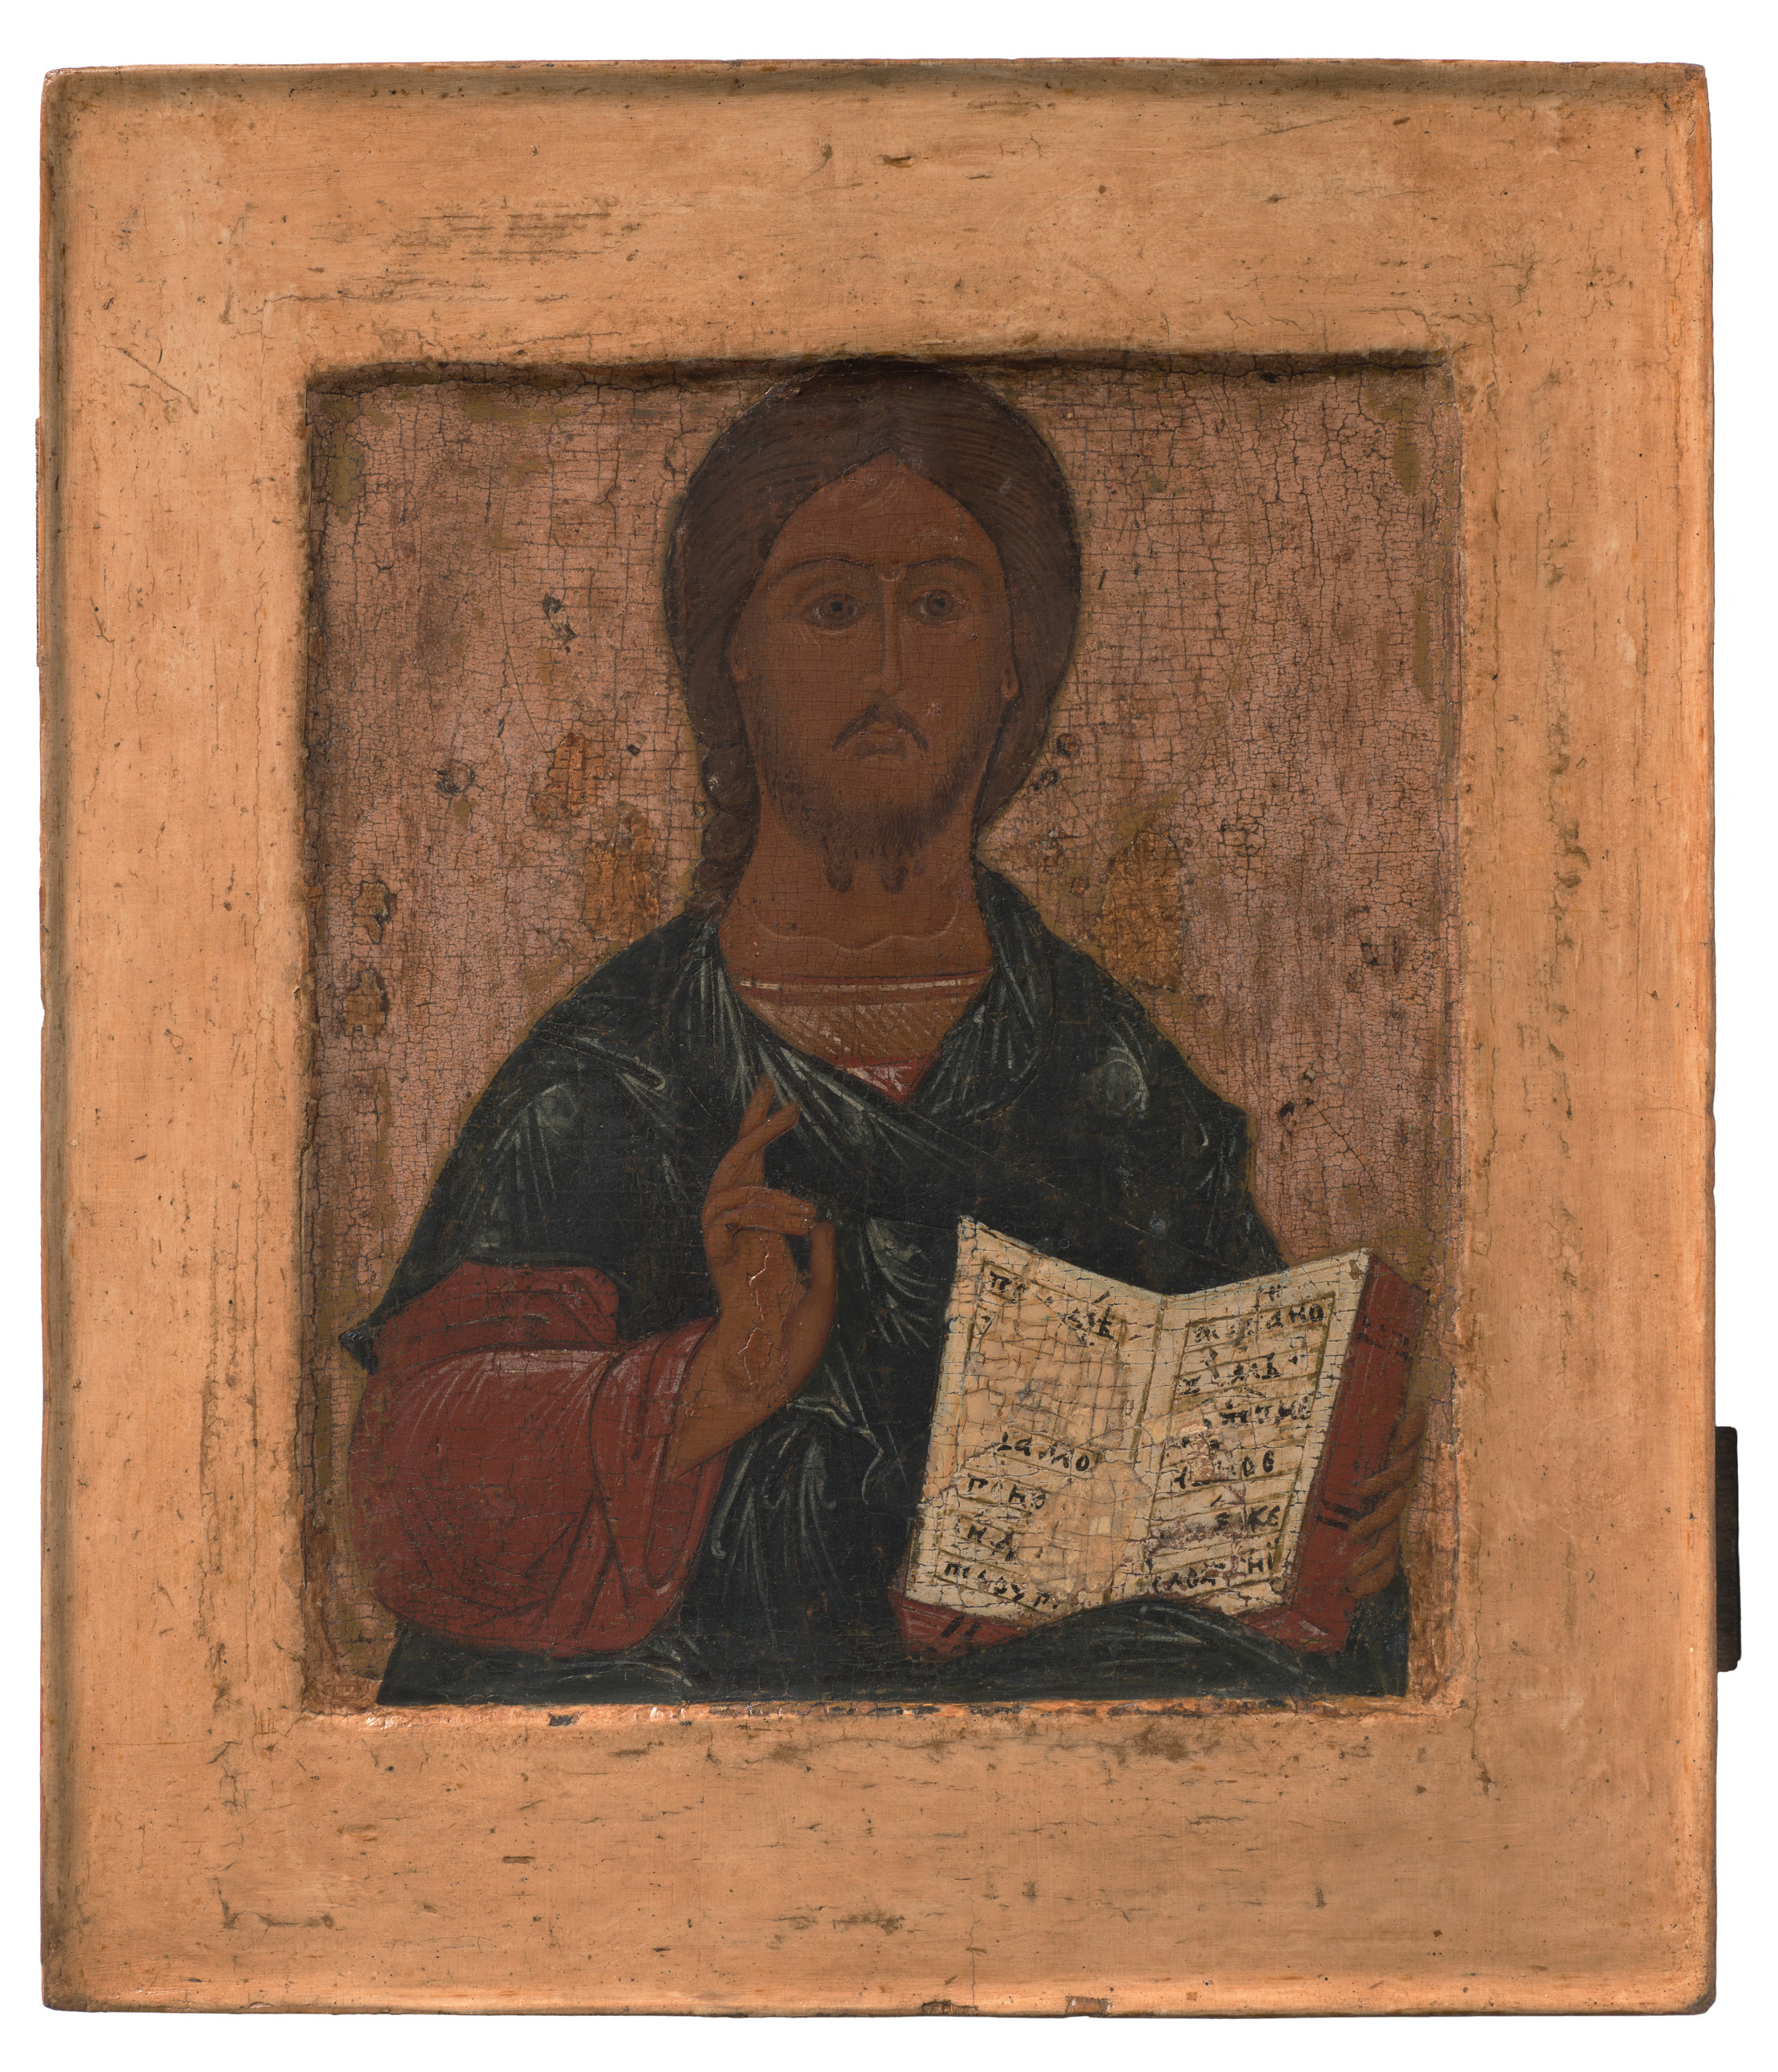 <p><em>Christ Pantocrator</em>, Russia, Novgorod, early 17th century, tempera and gesso on linen over wood, private collection, Canberra</p>